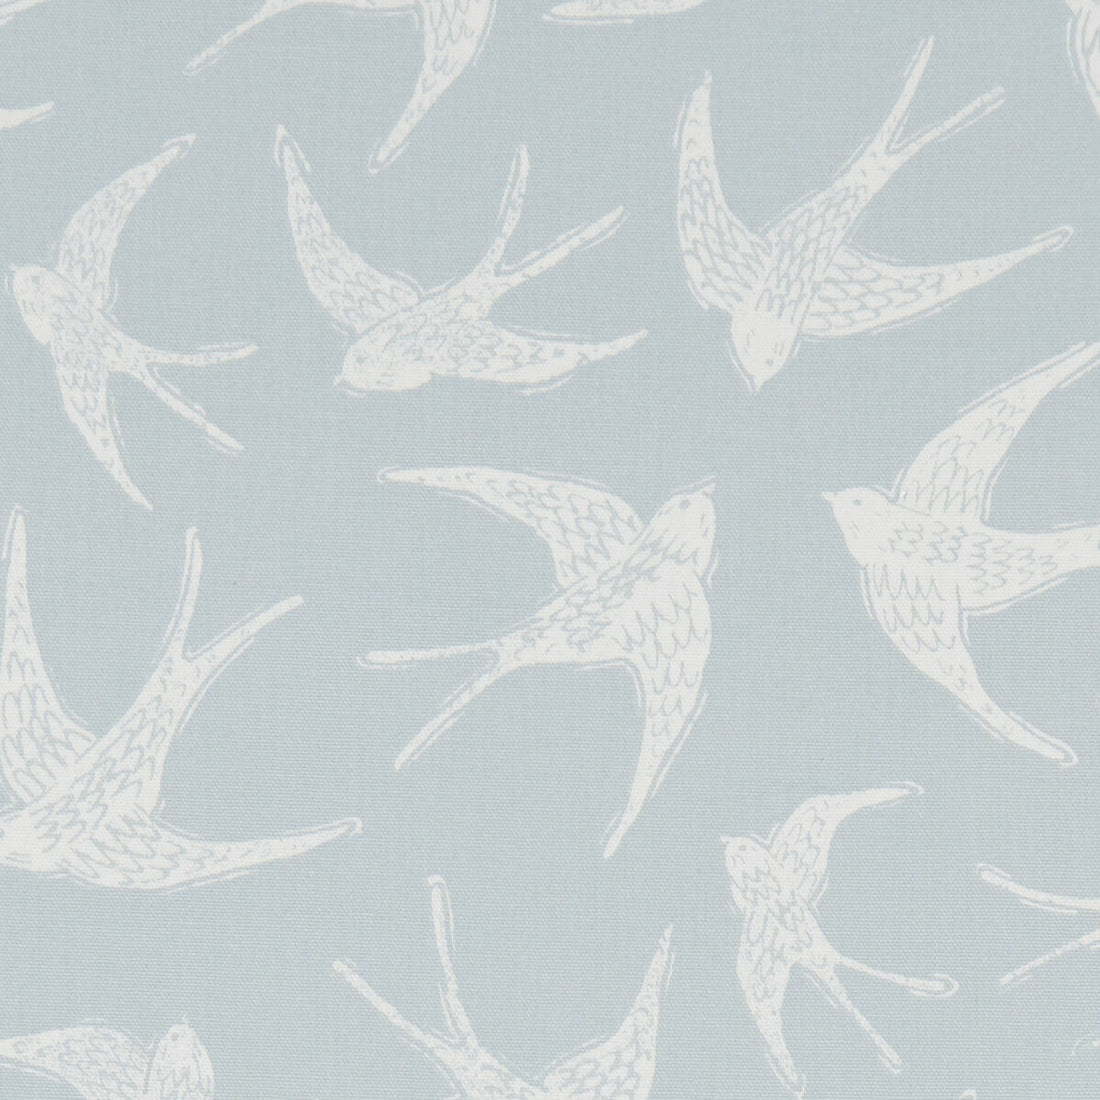 Fly Away fabric in duckegg color - pattern F1187/01.CAC.0 - by Clarke And Clarke in the Land &amp; Sea By Studio G For C&amp;C collection